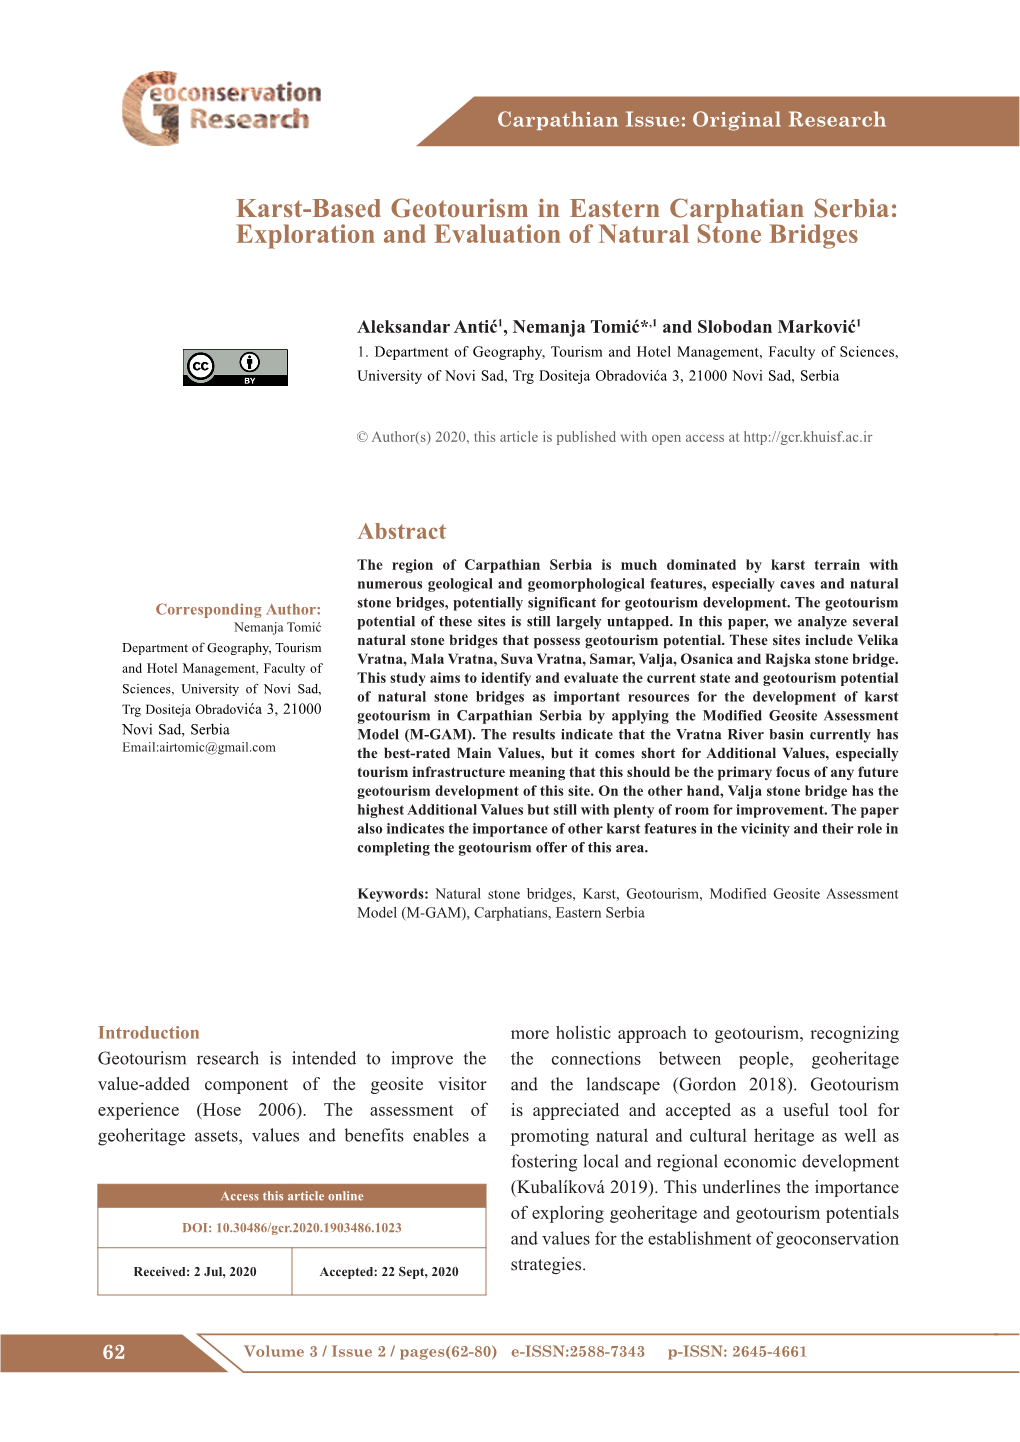 Karst-Based Geotourism in Eastern Carphatian Serbia: Exploration and Evaluation of Natural Stone Bridges